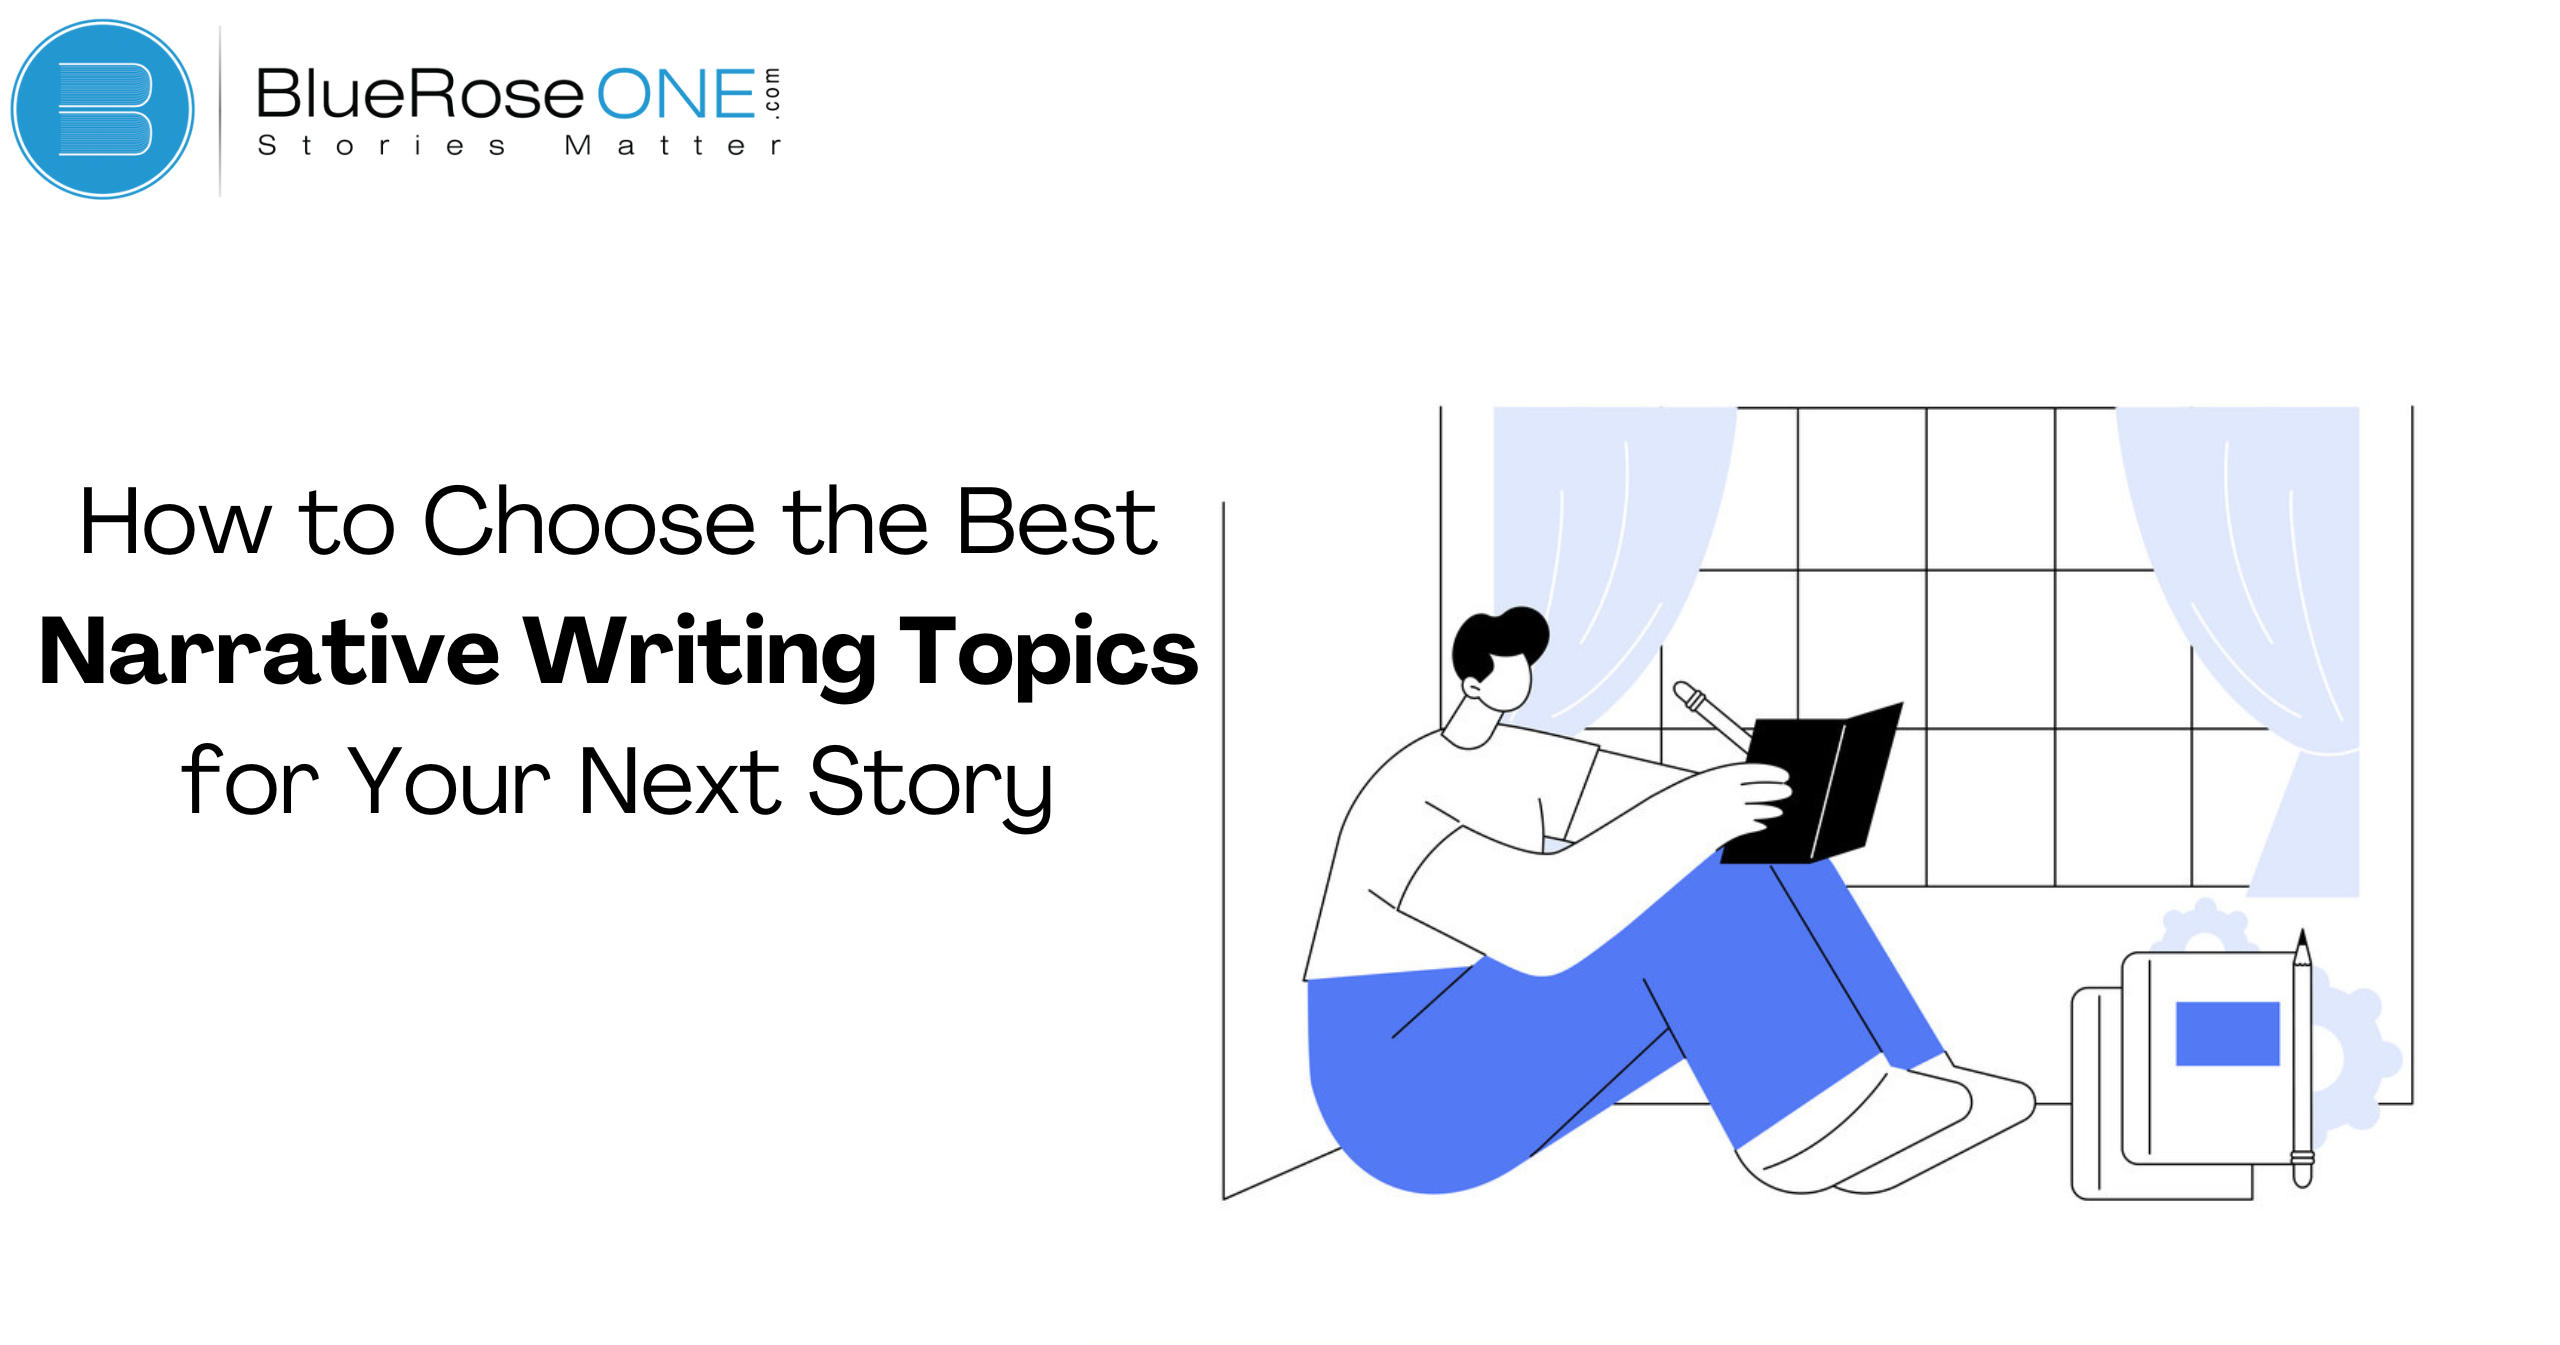 How to Choose the Best Narrative Writing Topics for Your Next Story